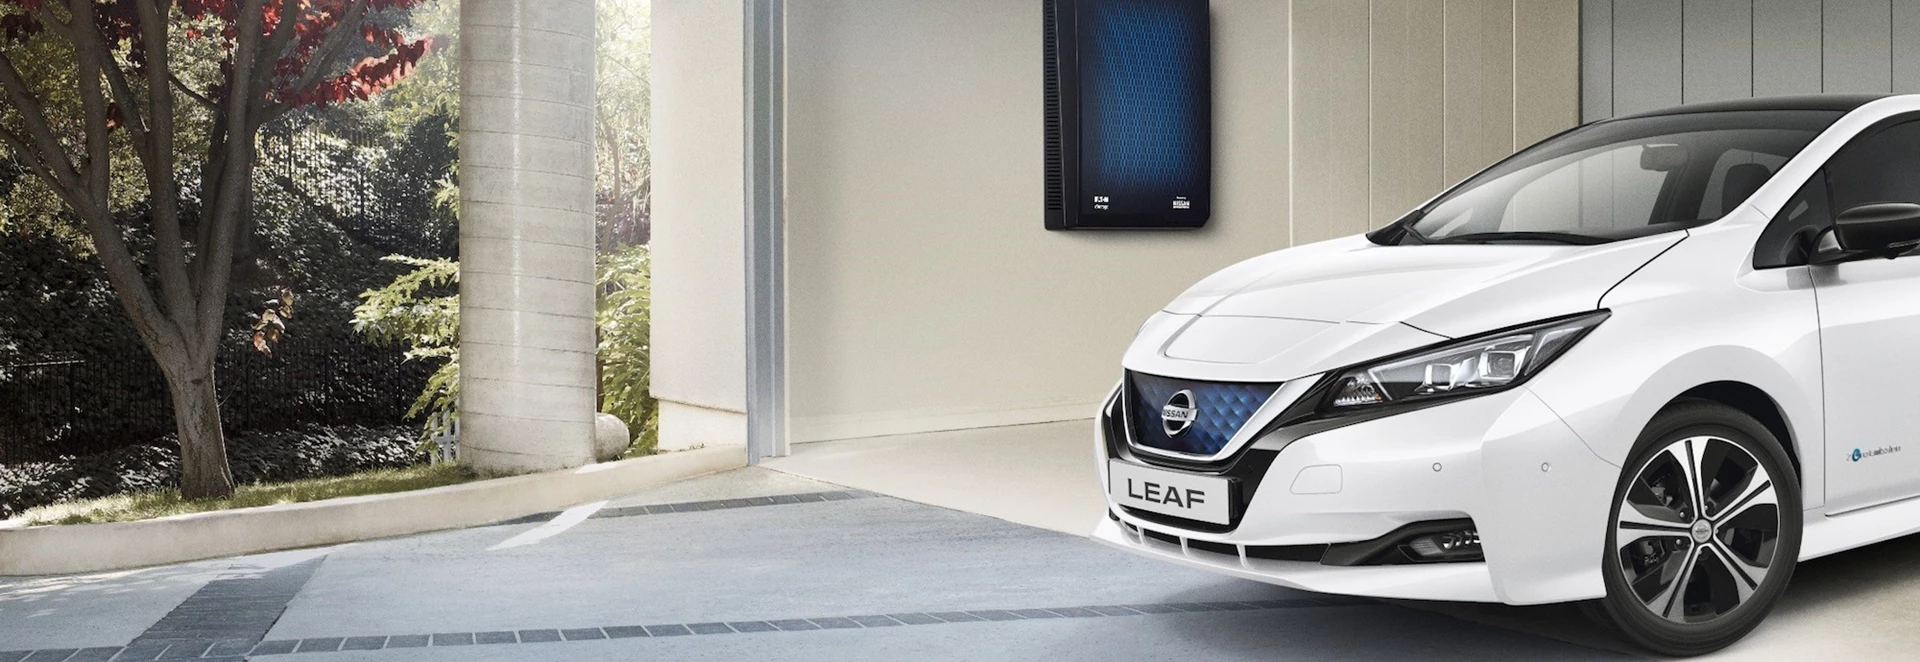 Nissan launches Energy Solar service and products 